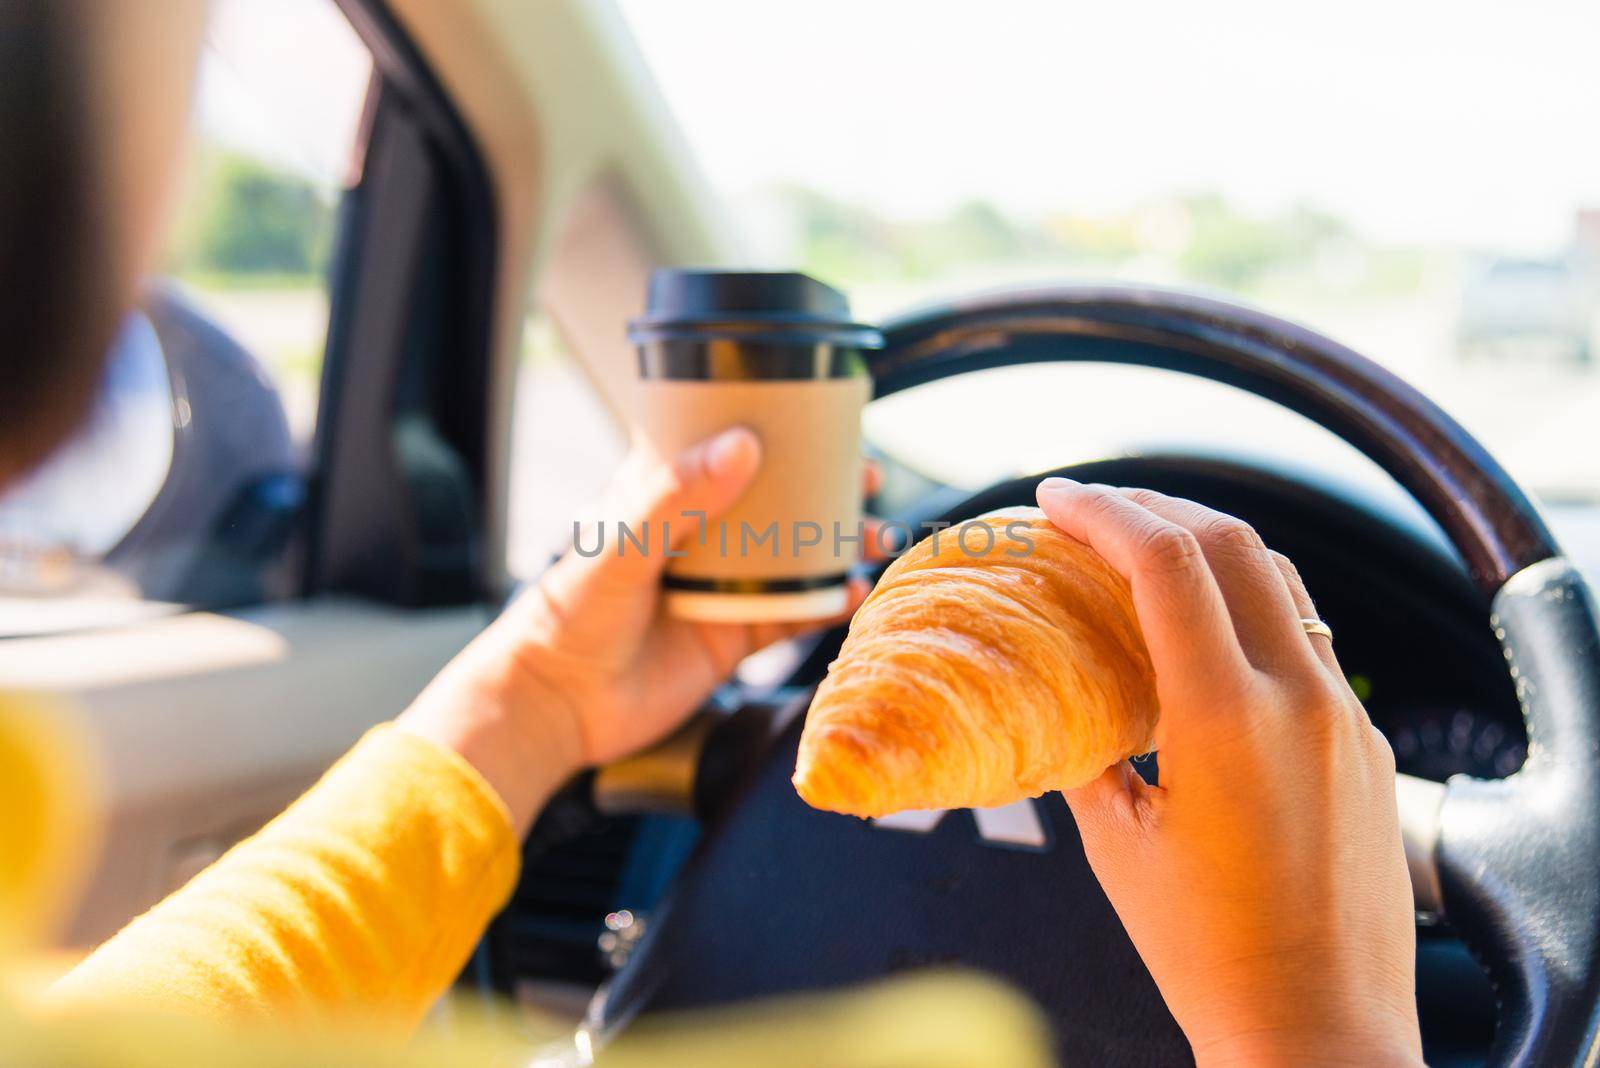 woman eating food fastfood and drink coffee while driving the car by Sorapop